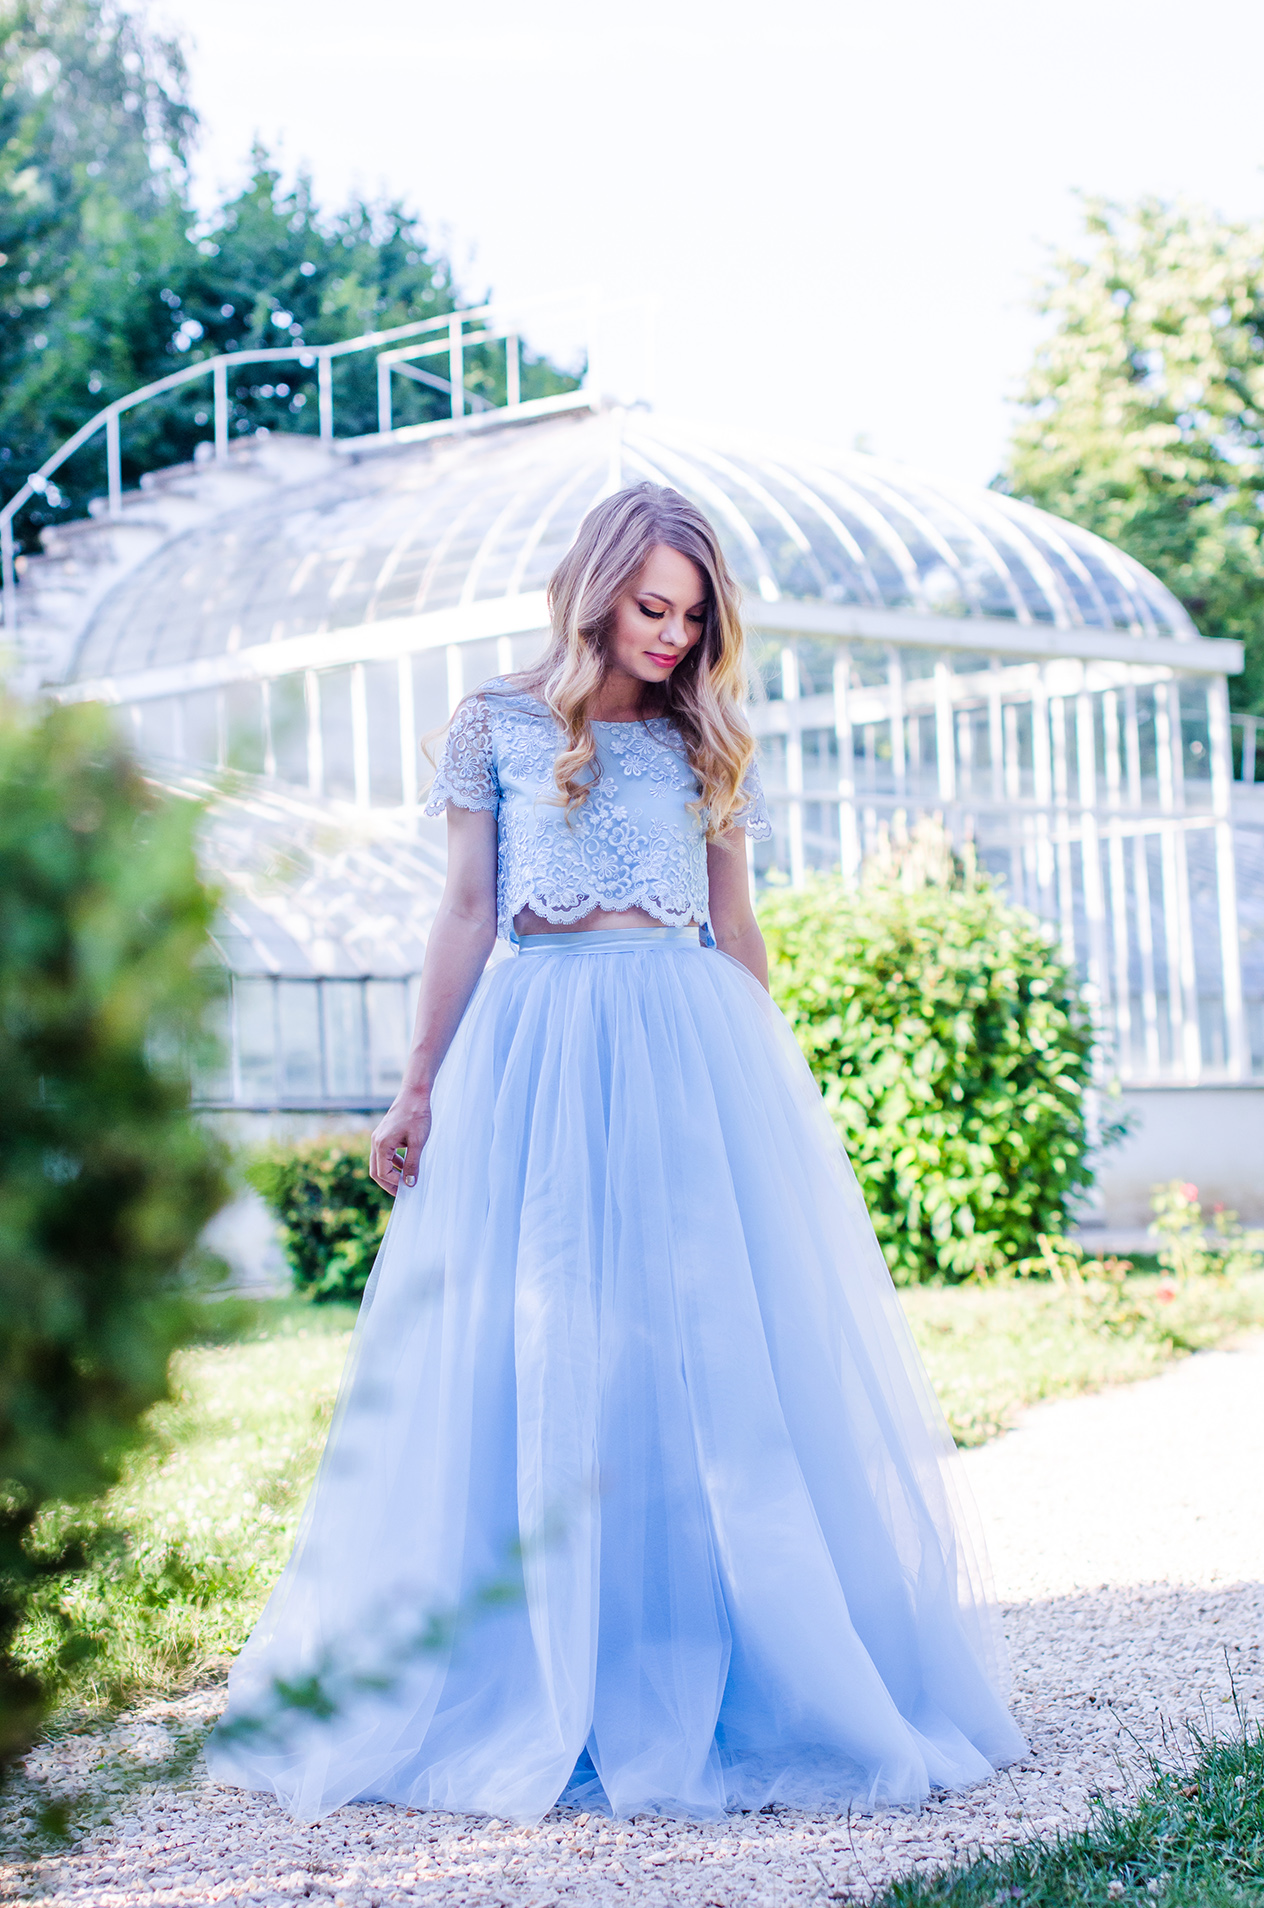 pink-wish-collection-blue-tulle-skirt-lace-top-wedding-princess-dress (10)